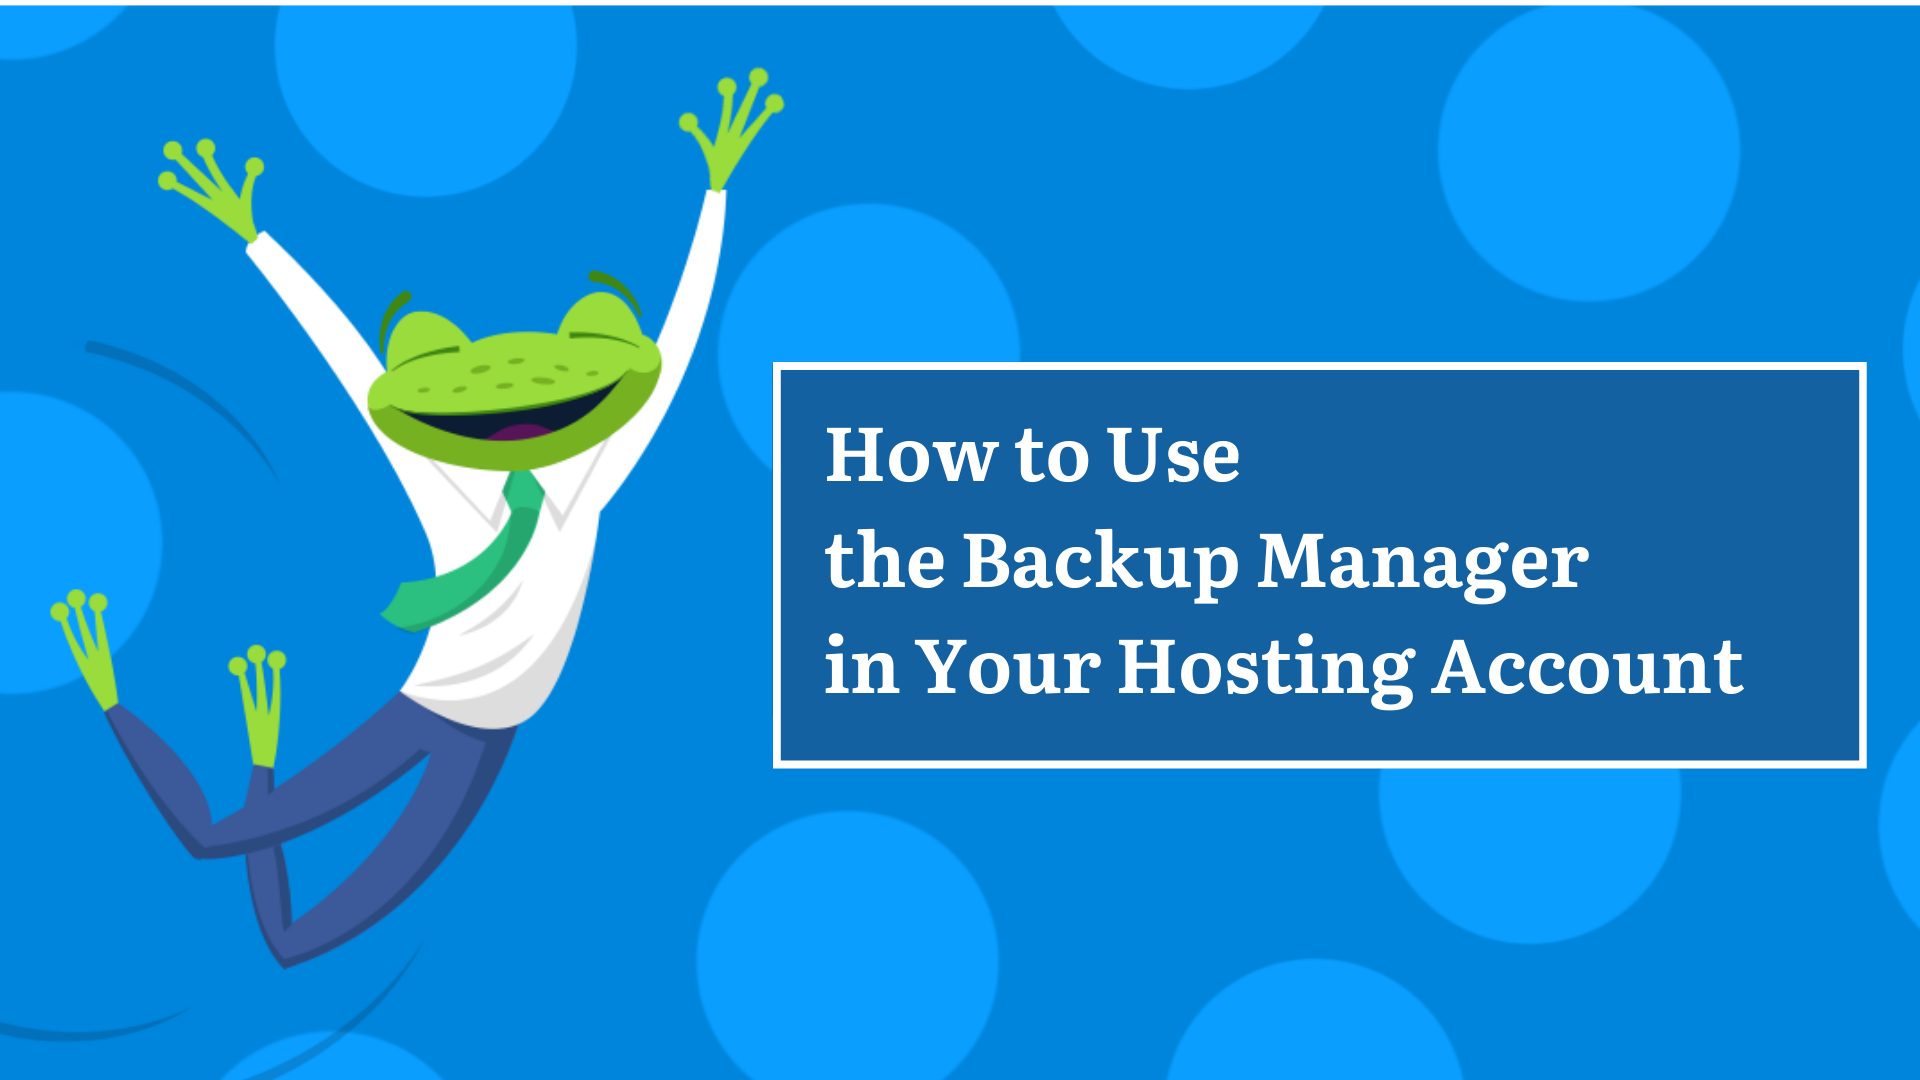 How to Use the Backup Manager in Your Hosting Account